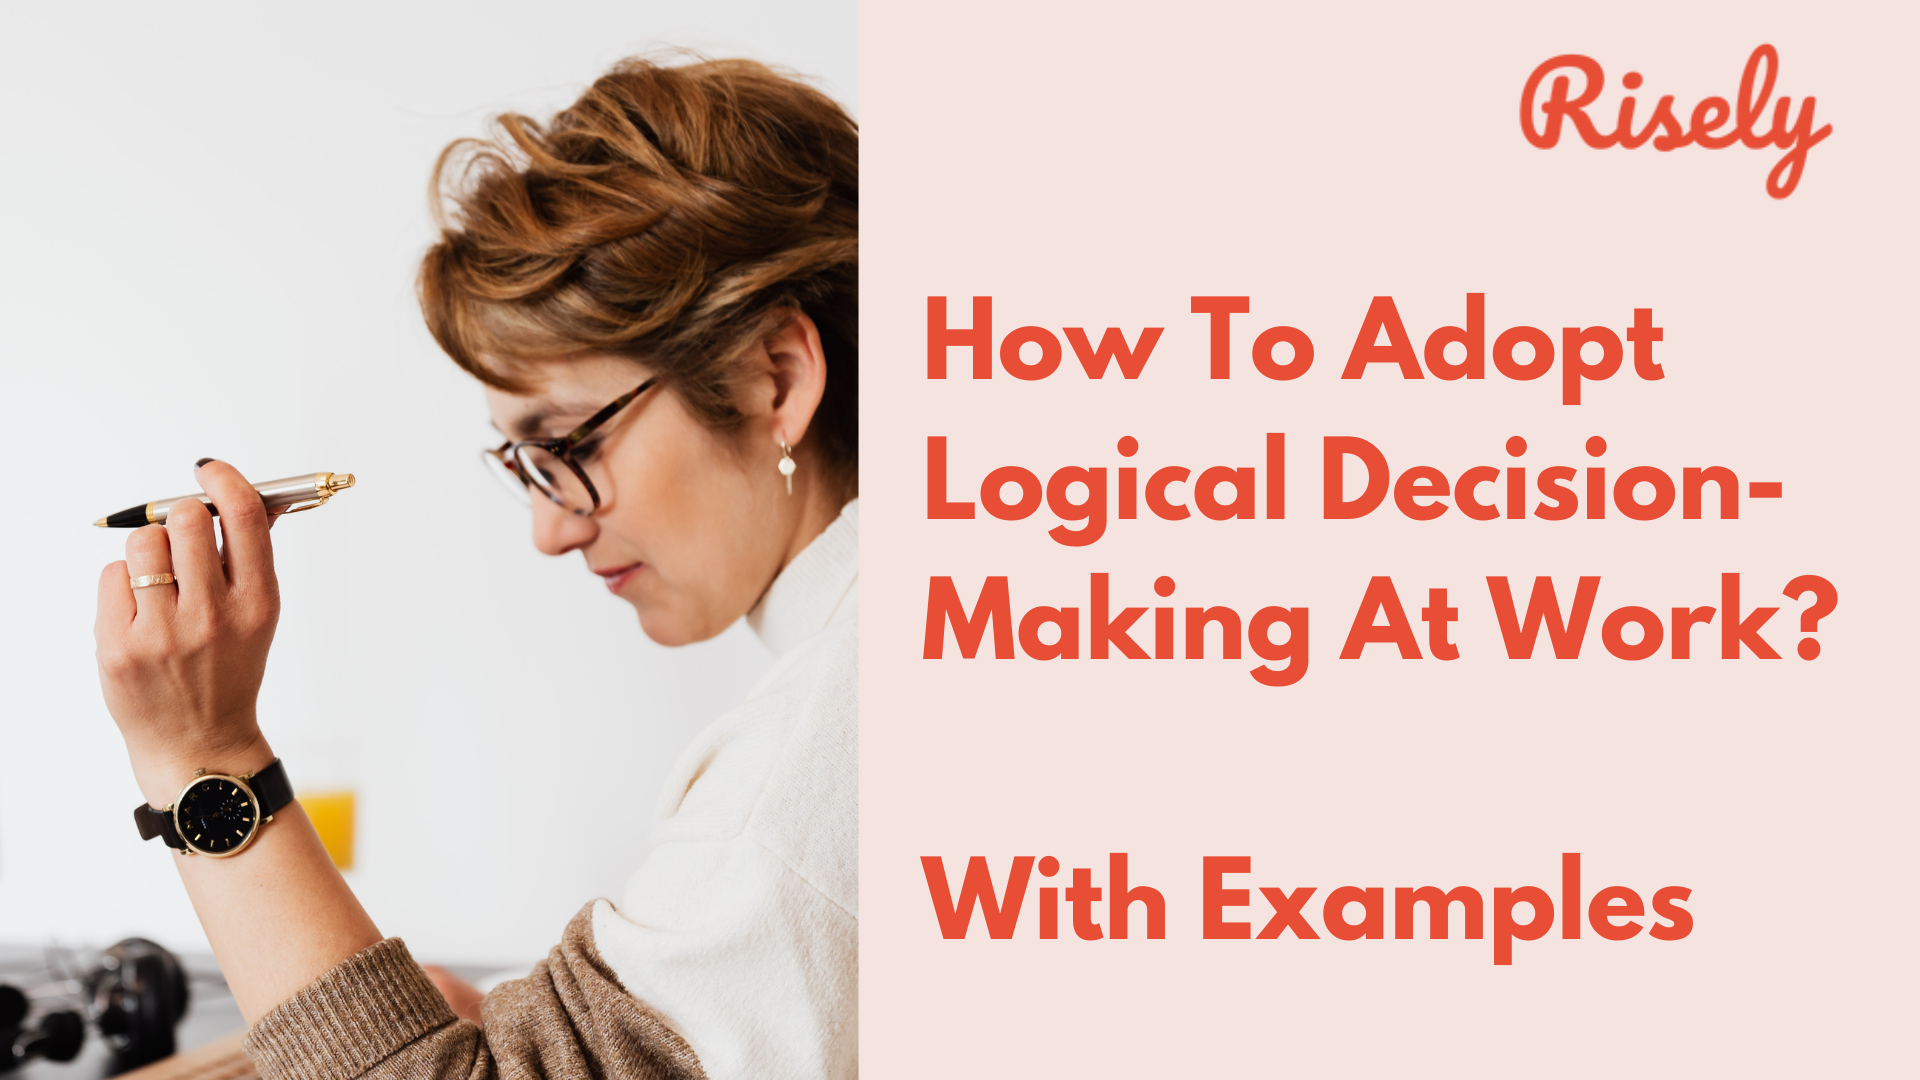 How To Adopt Logical Decision-Making At Work? With Examples